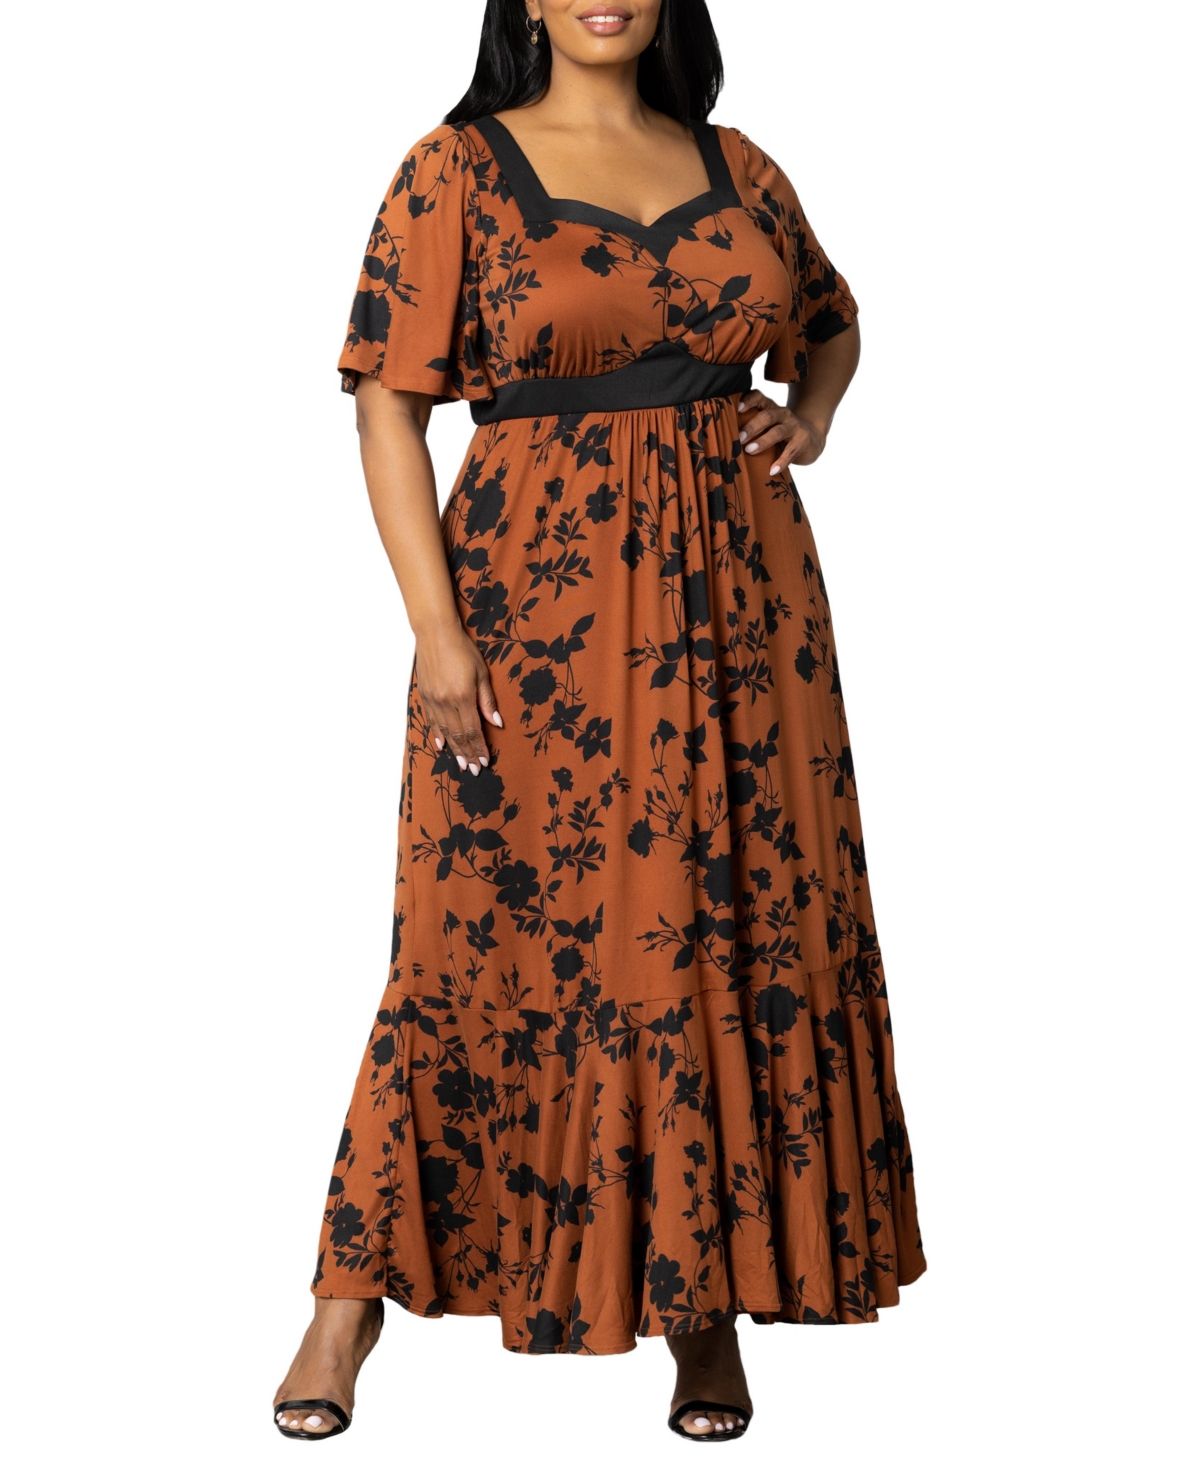 Plus Size Icon Maxi Dress with Sweetheart Neckline - Auburn floral impressions